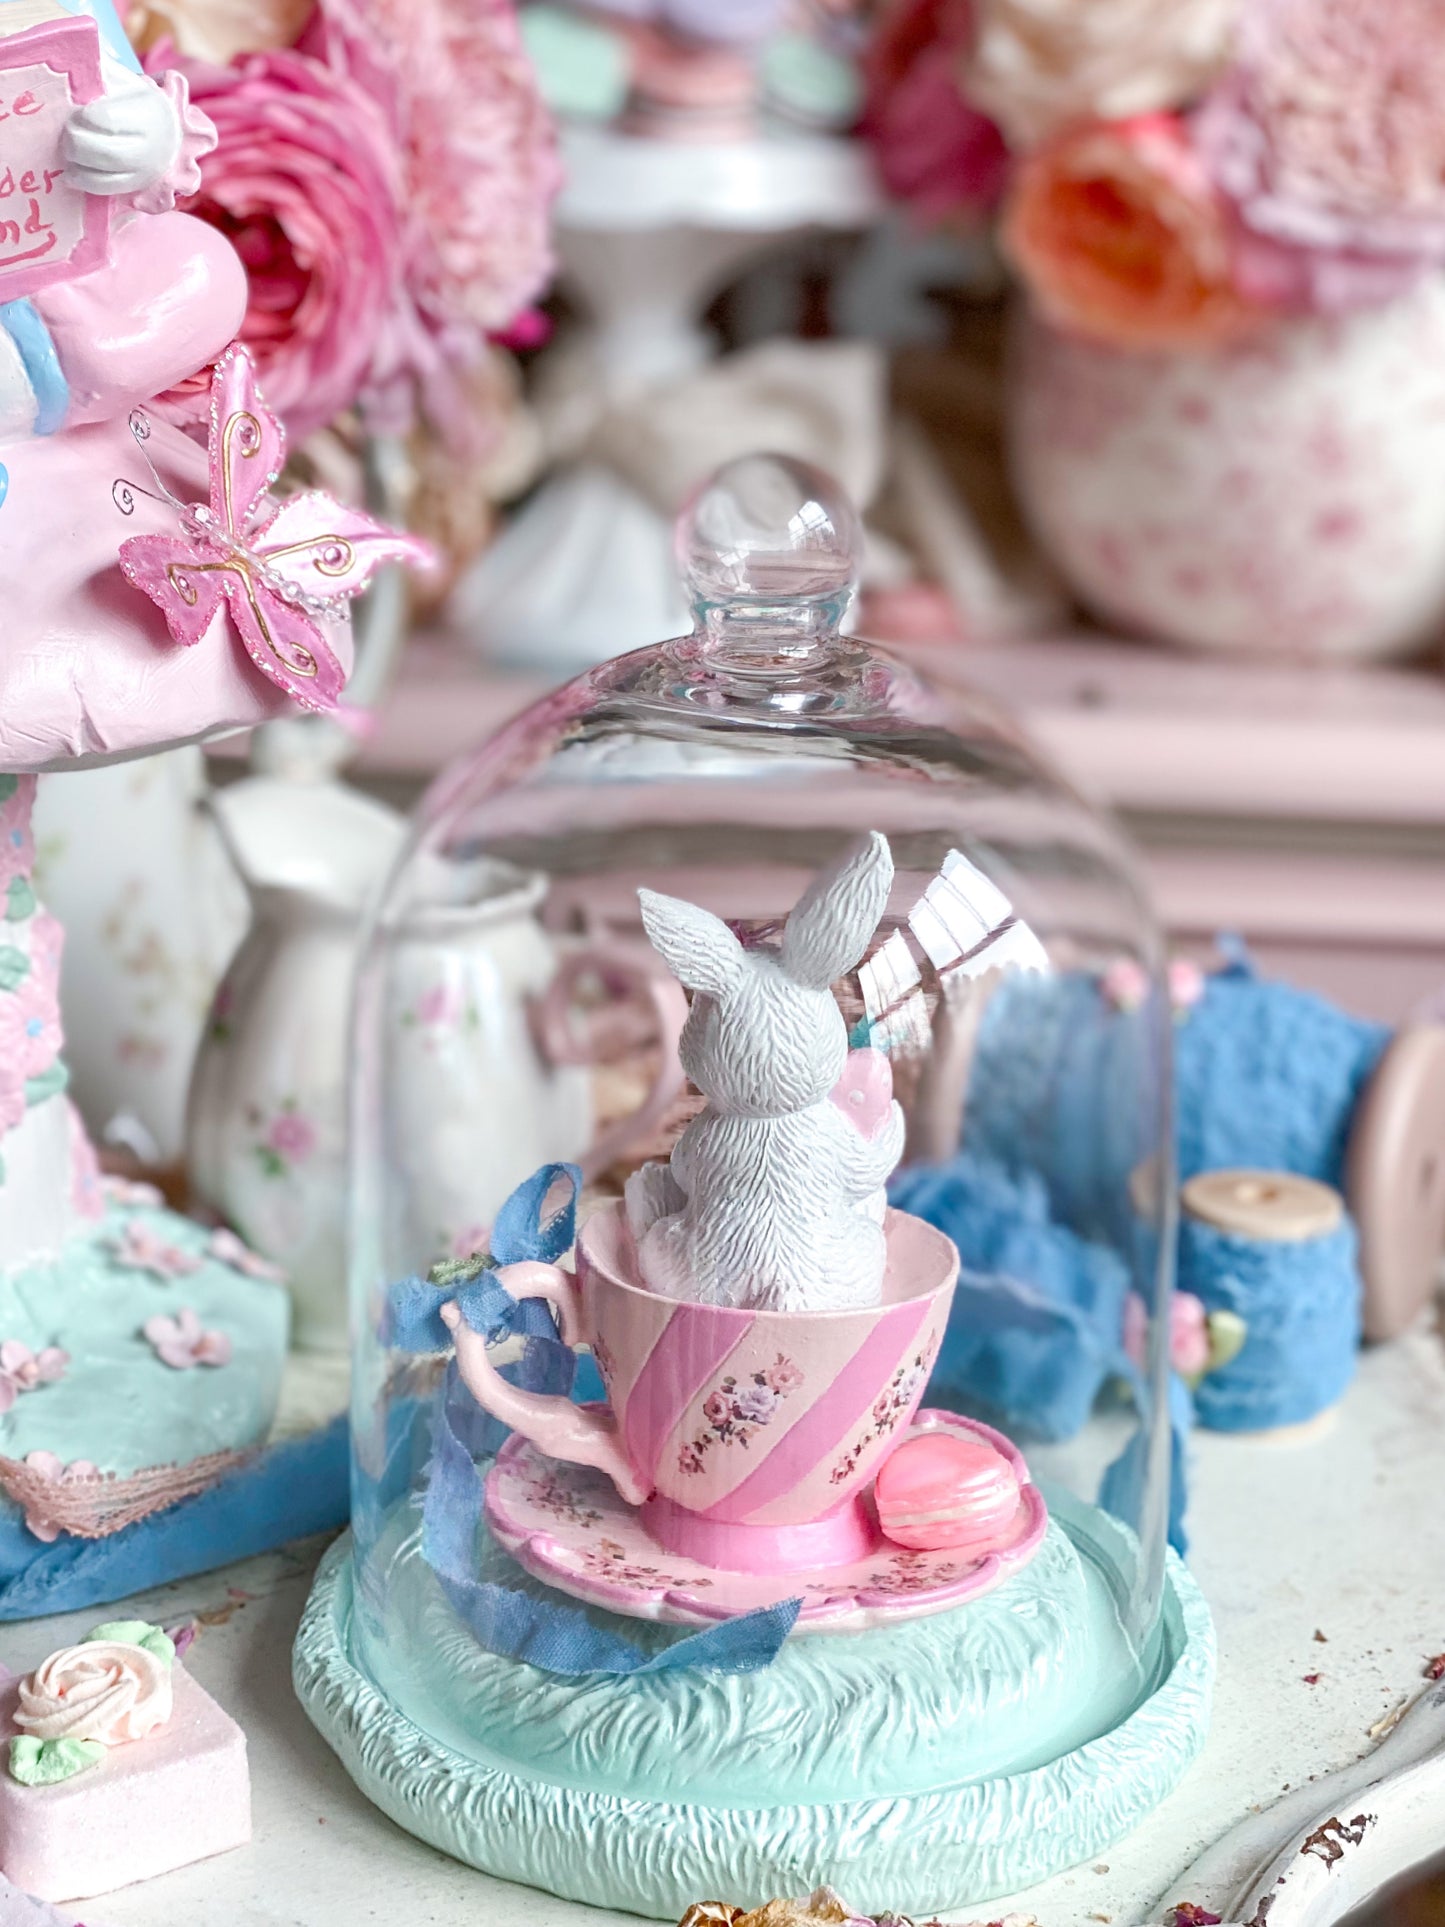 Bespoke Hand Painted Pastel Pink Bunny in a Tea Cup Cloche